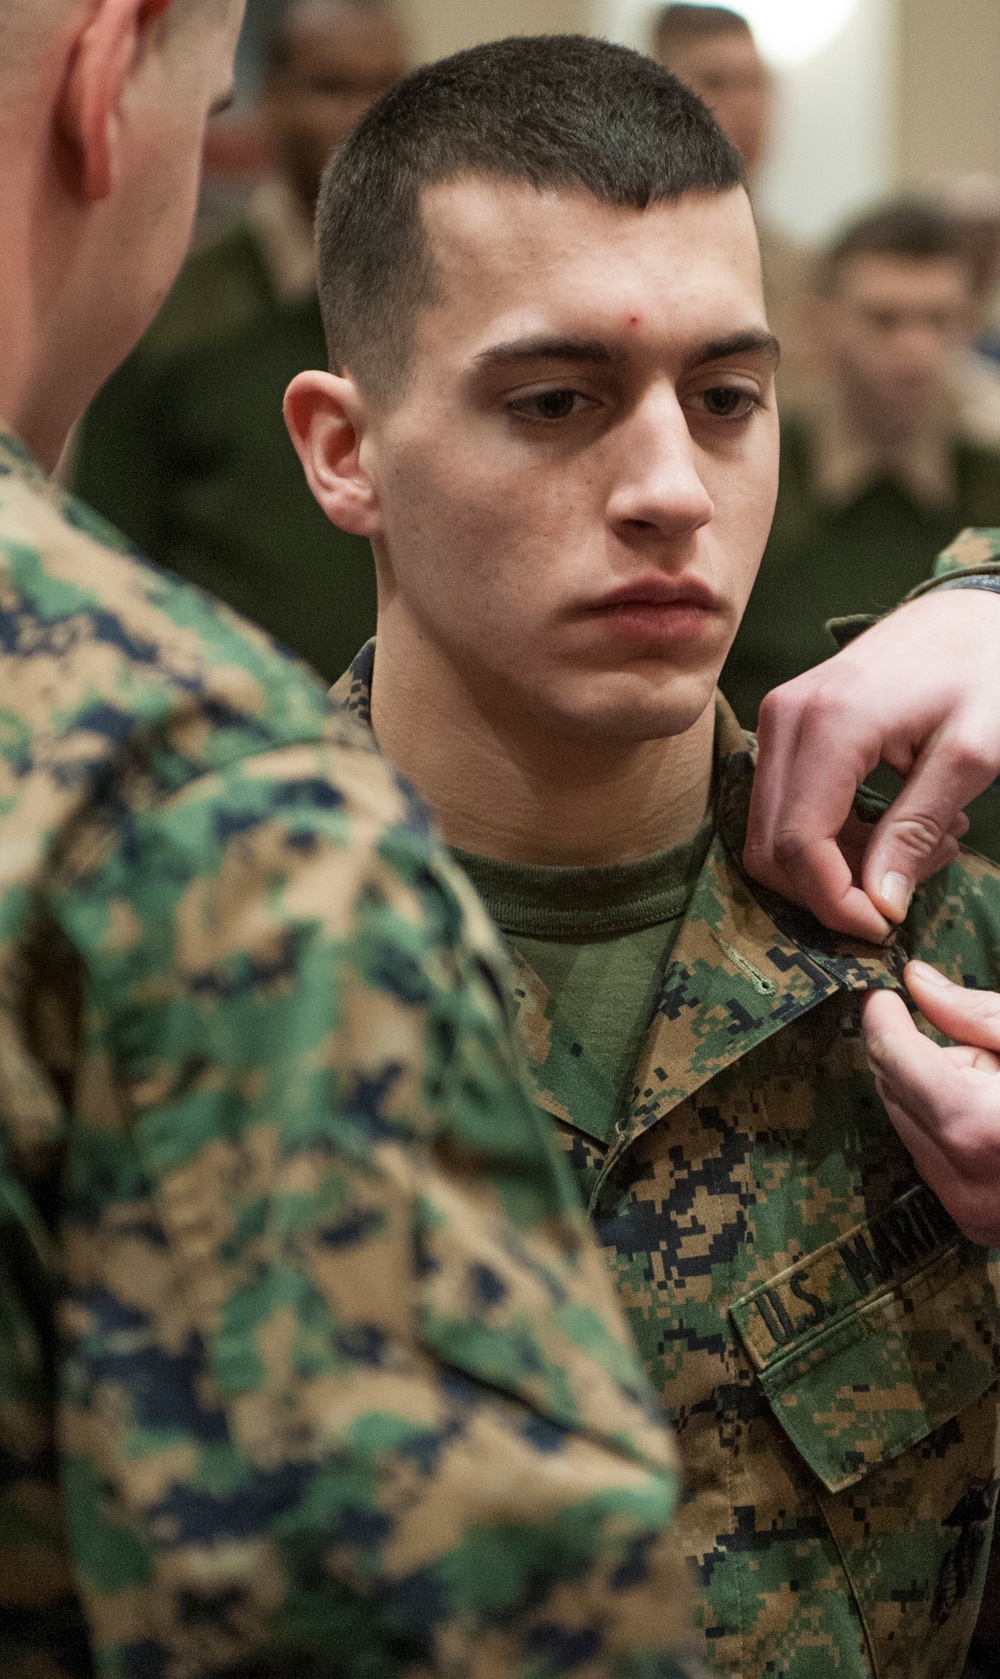 Milford native gets promoted to rank of corporal in the United States Marine Corps